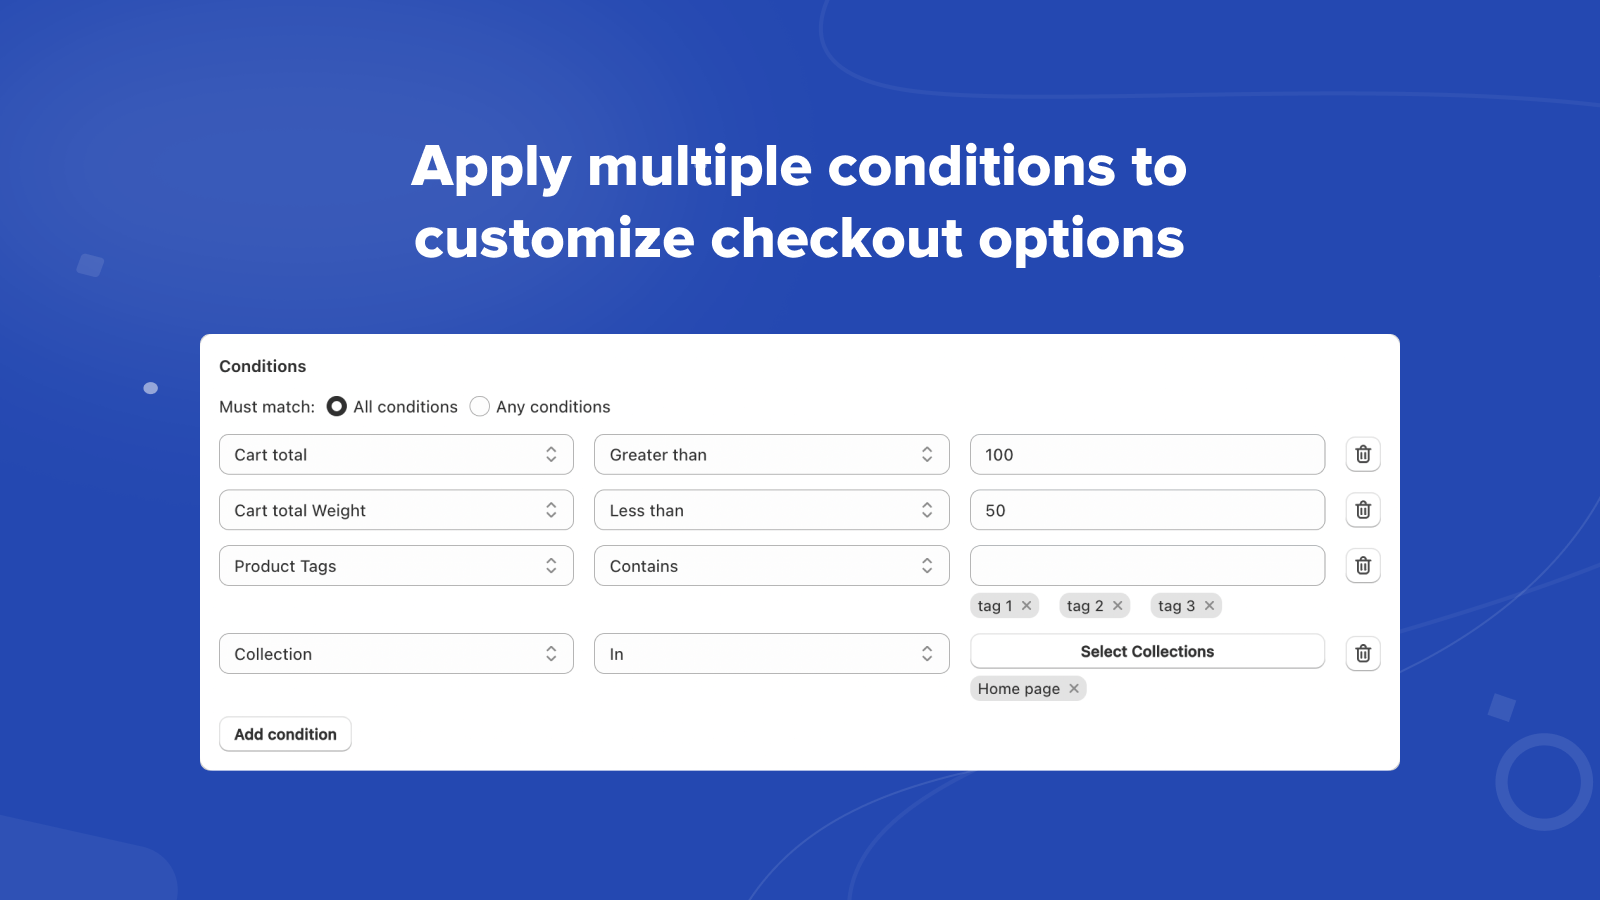 Apply multiple conditions to customize checkout options